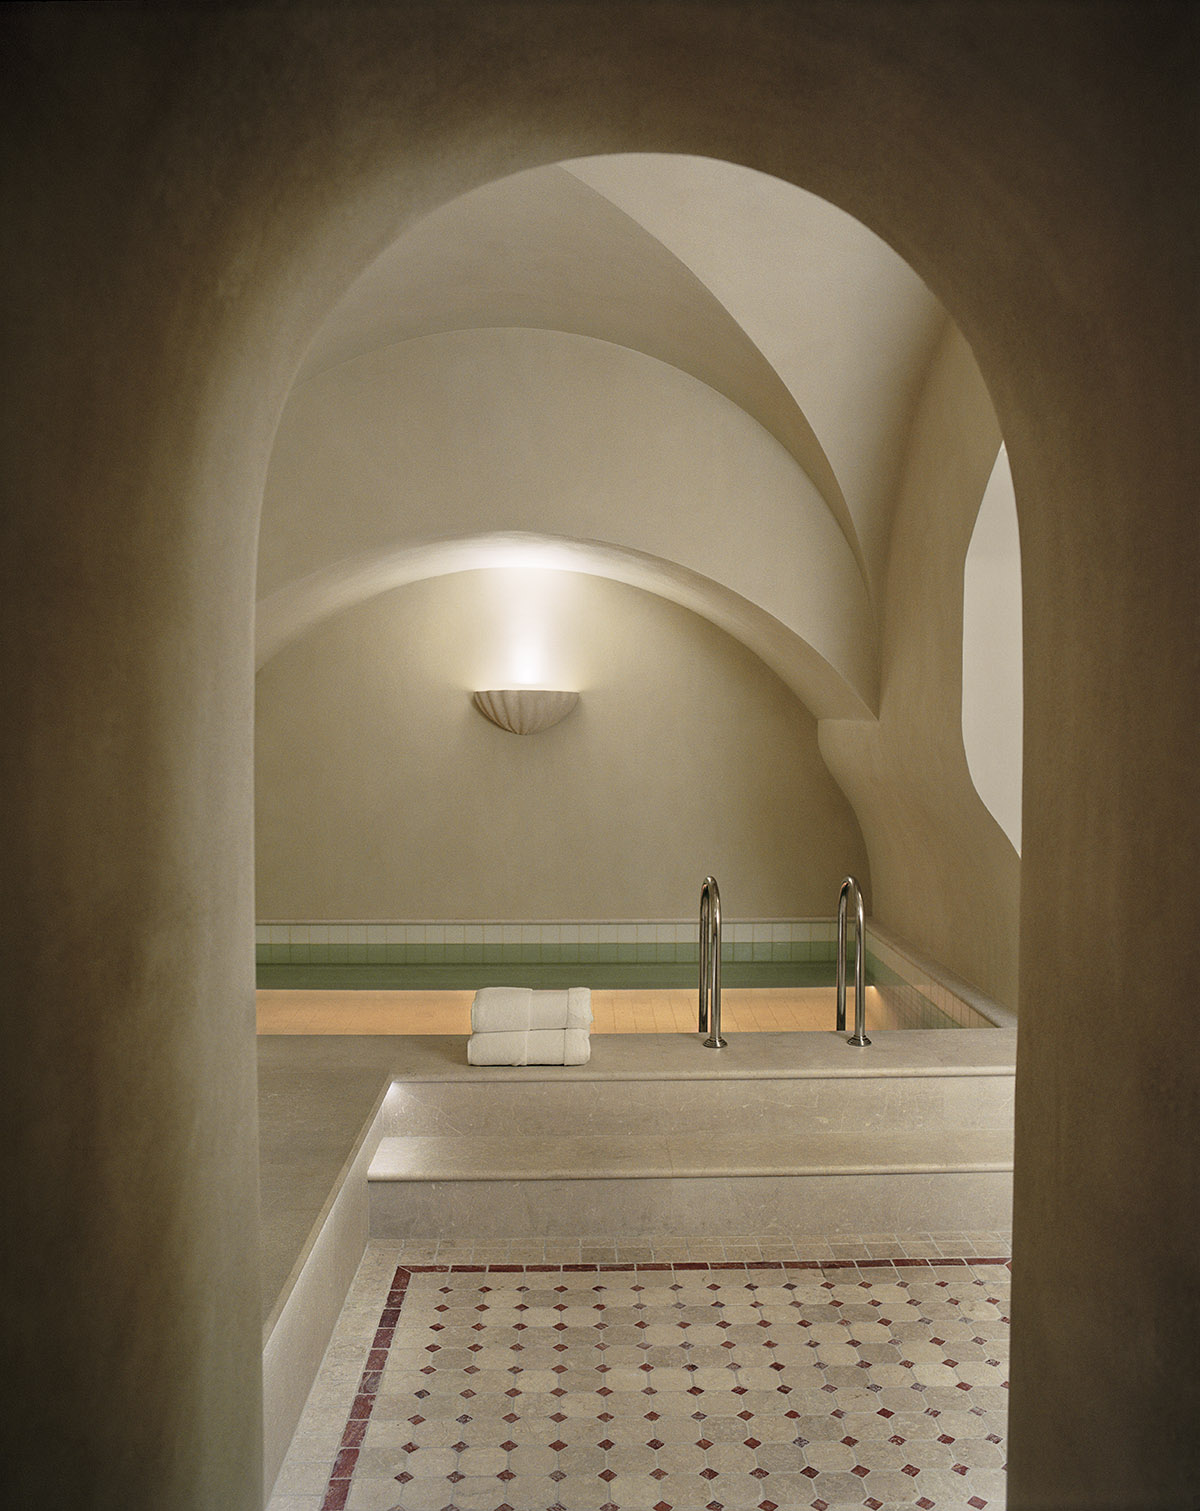  An arch leading to a pool in a spa